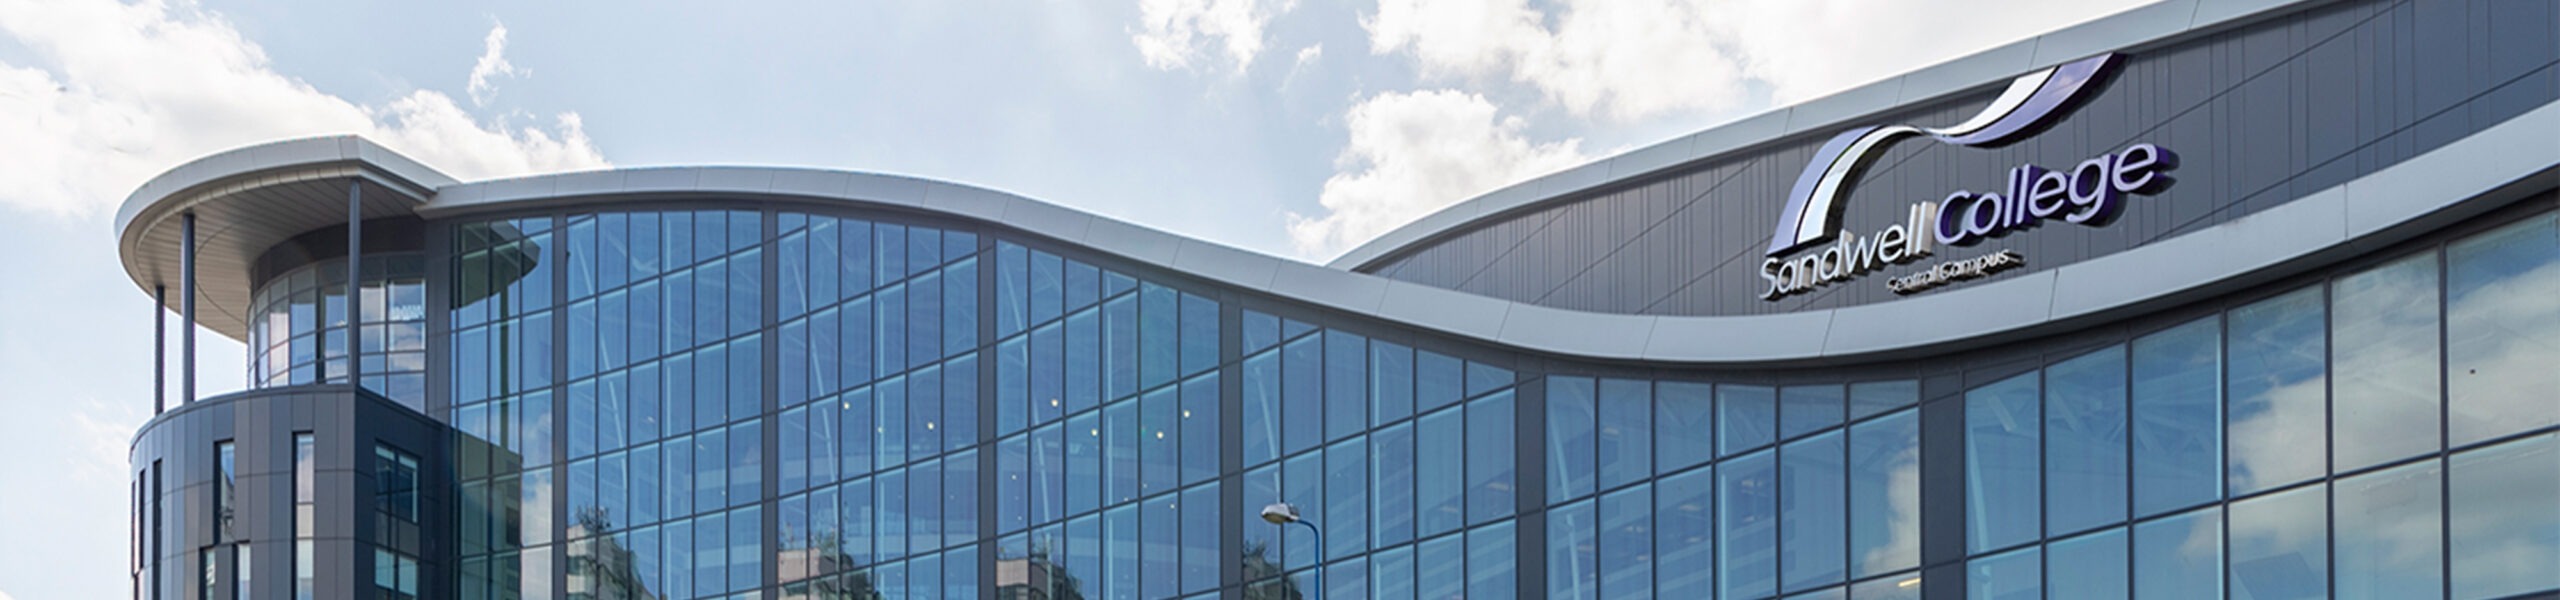 Tamlite Sandwell College West Bromwich Education LED Lighting Case Study header image building exterior